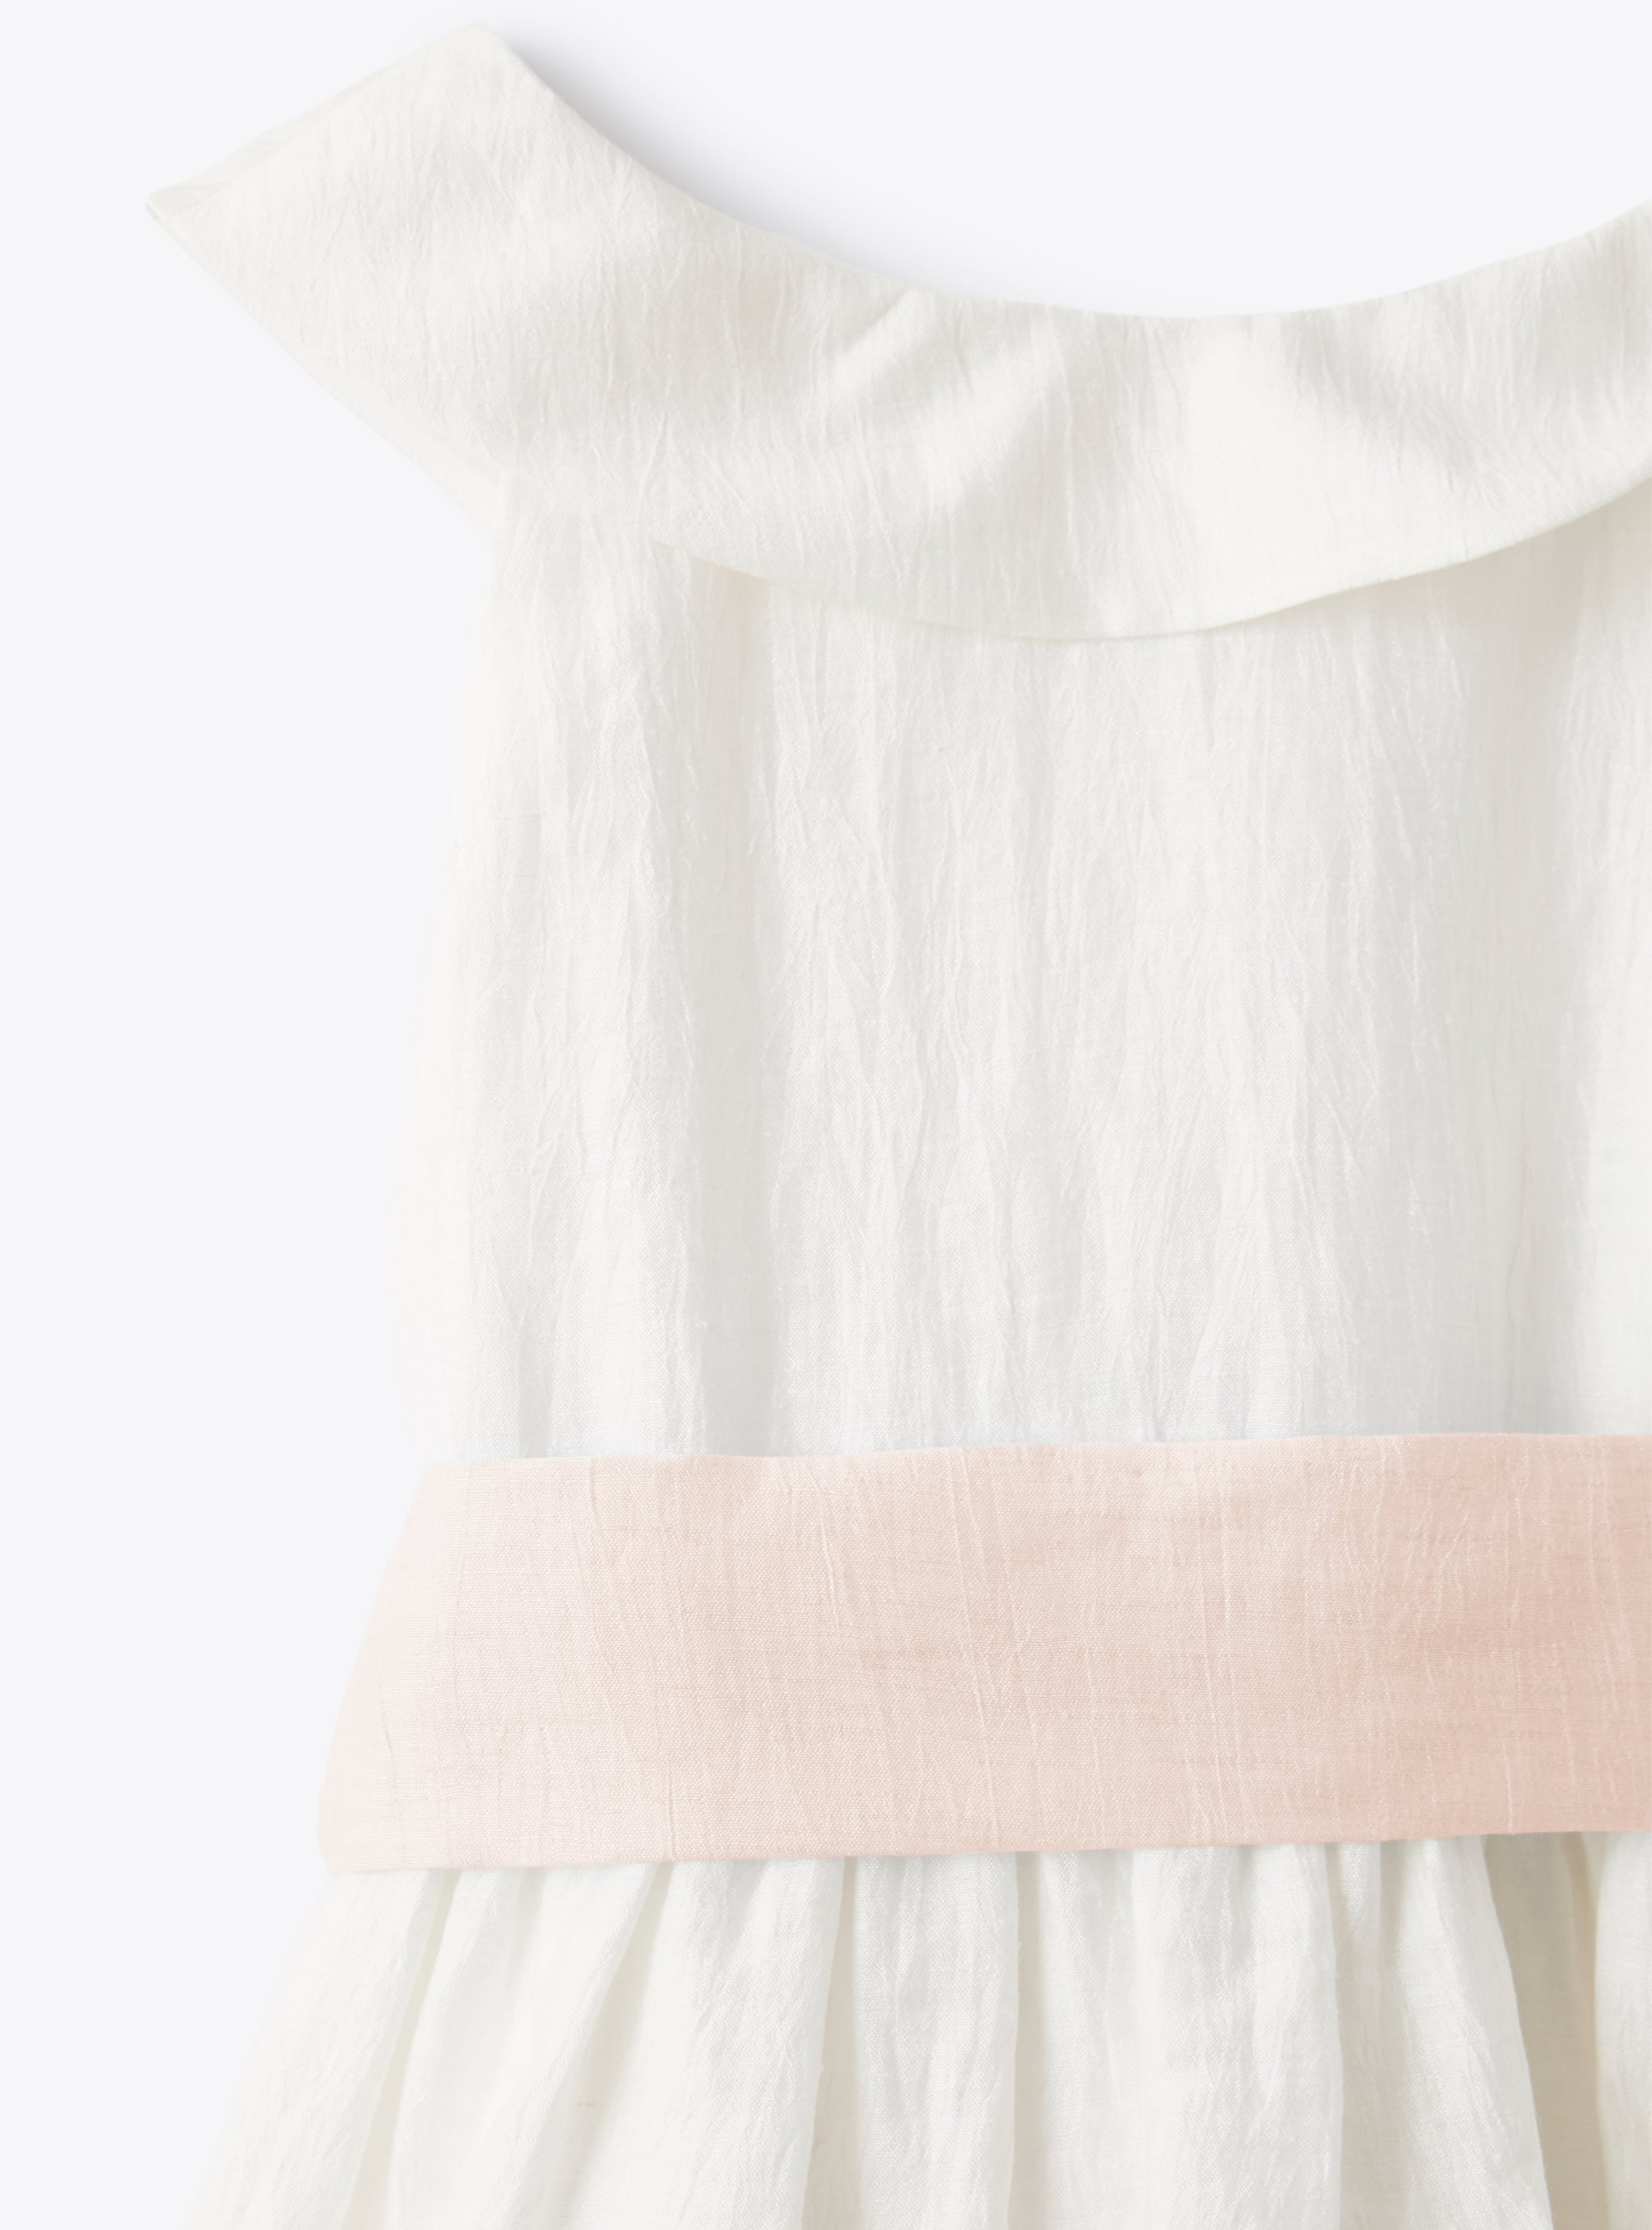 Dress in linen shantung with pink belt - White | Il Gufo